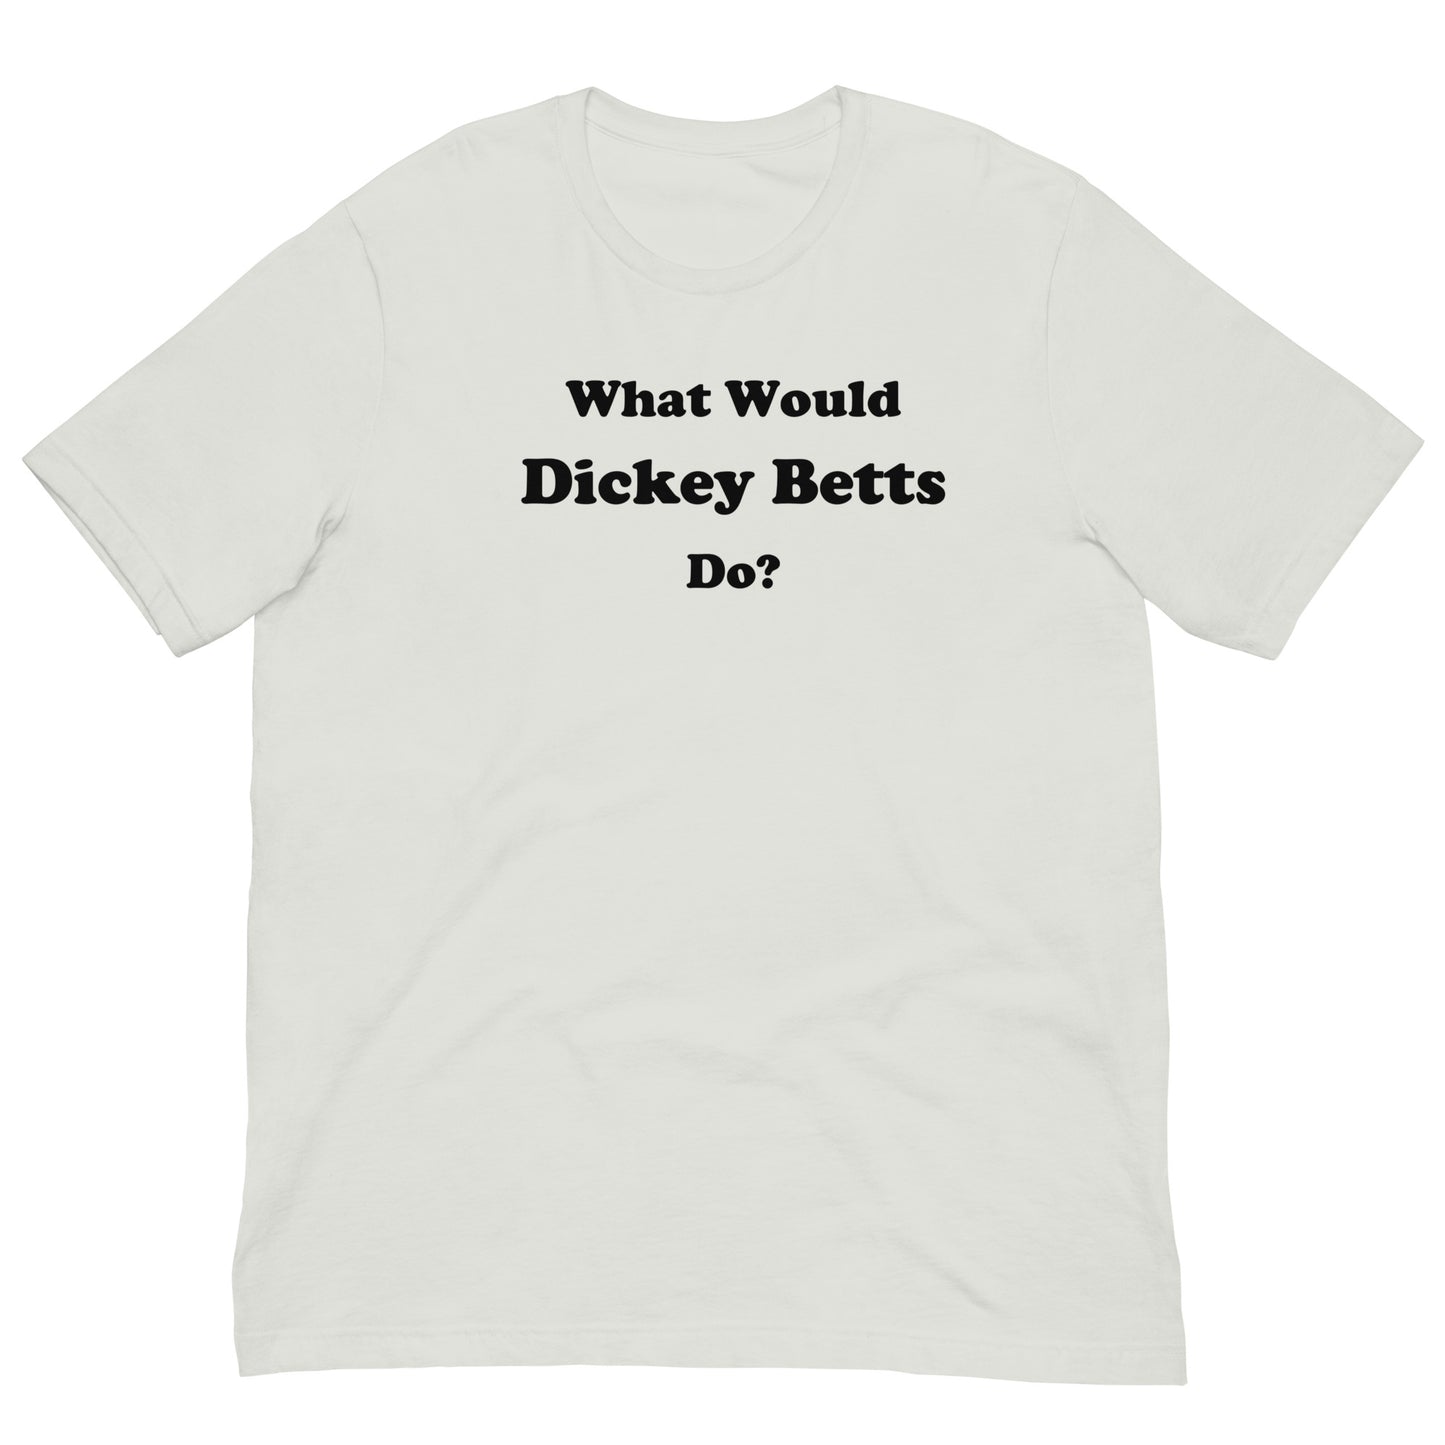 Would Would Dickey Betts Do TShirt (Black Lettering)